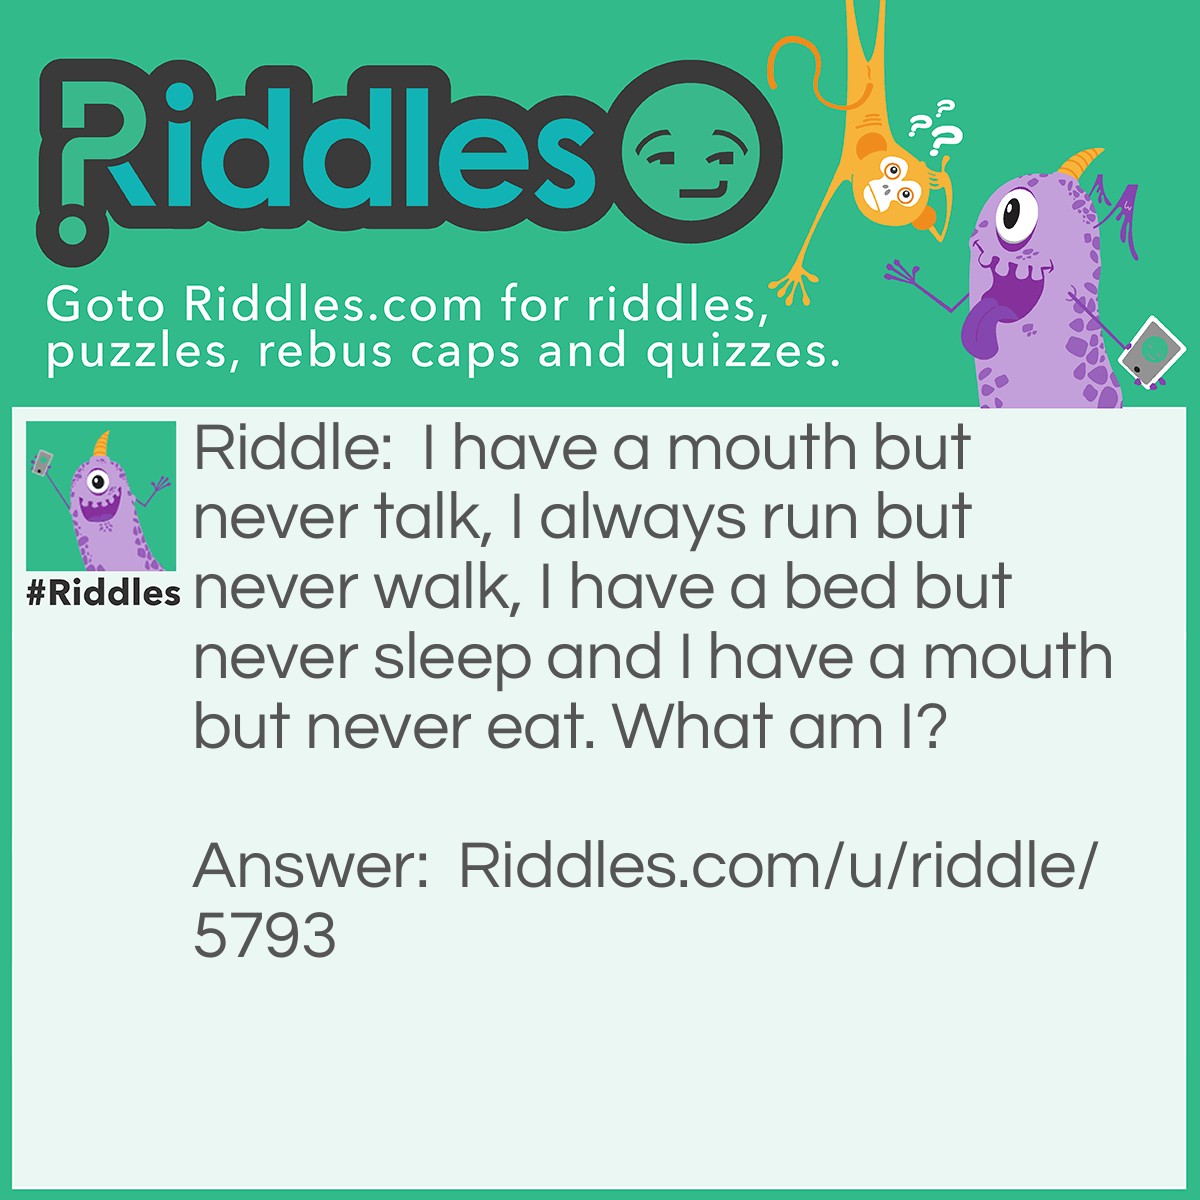 Riddle: I have a mouth but never talk, I always run but never walk, I have a bed but never sleep and I have a mouth but never eat. What am I? Answer: A River.